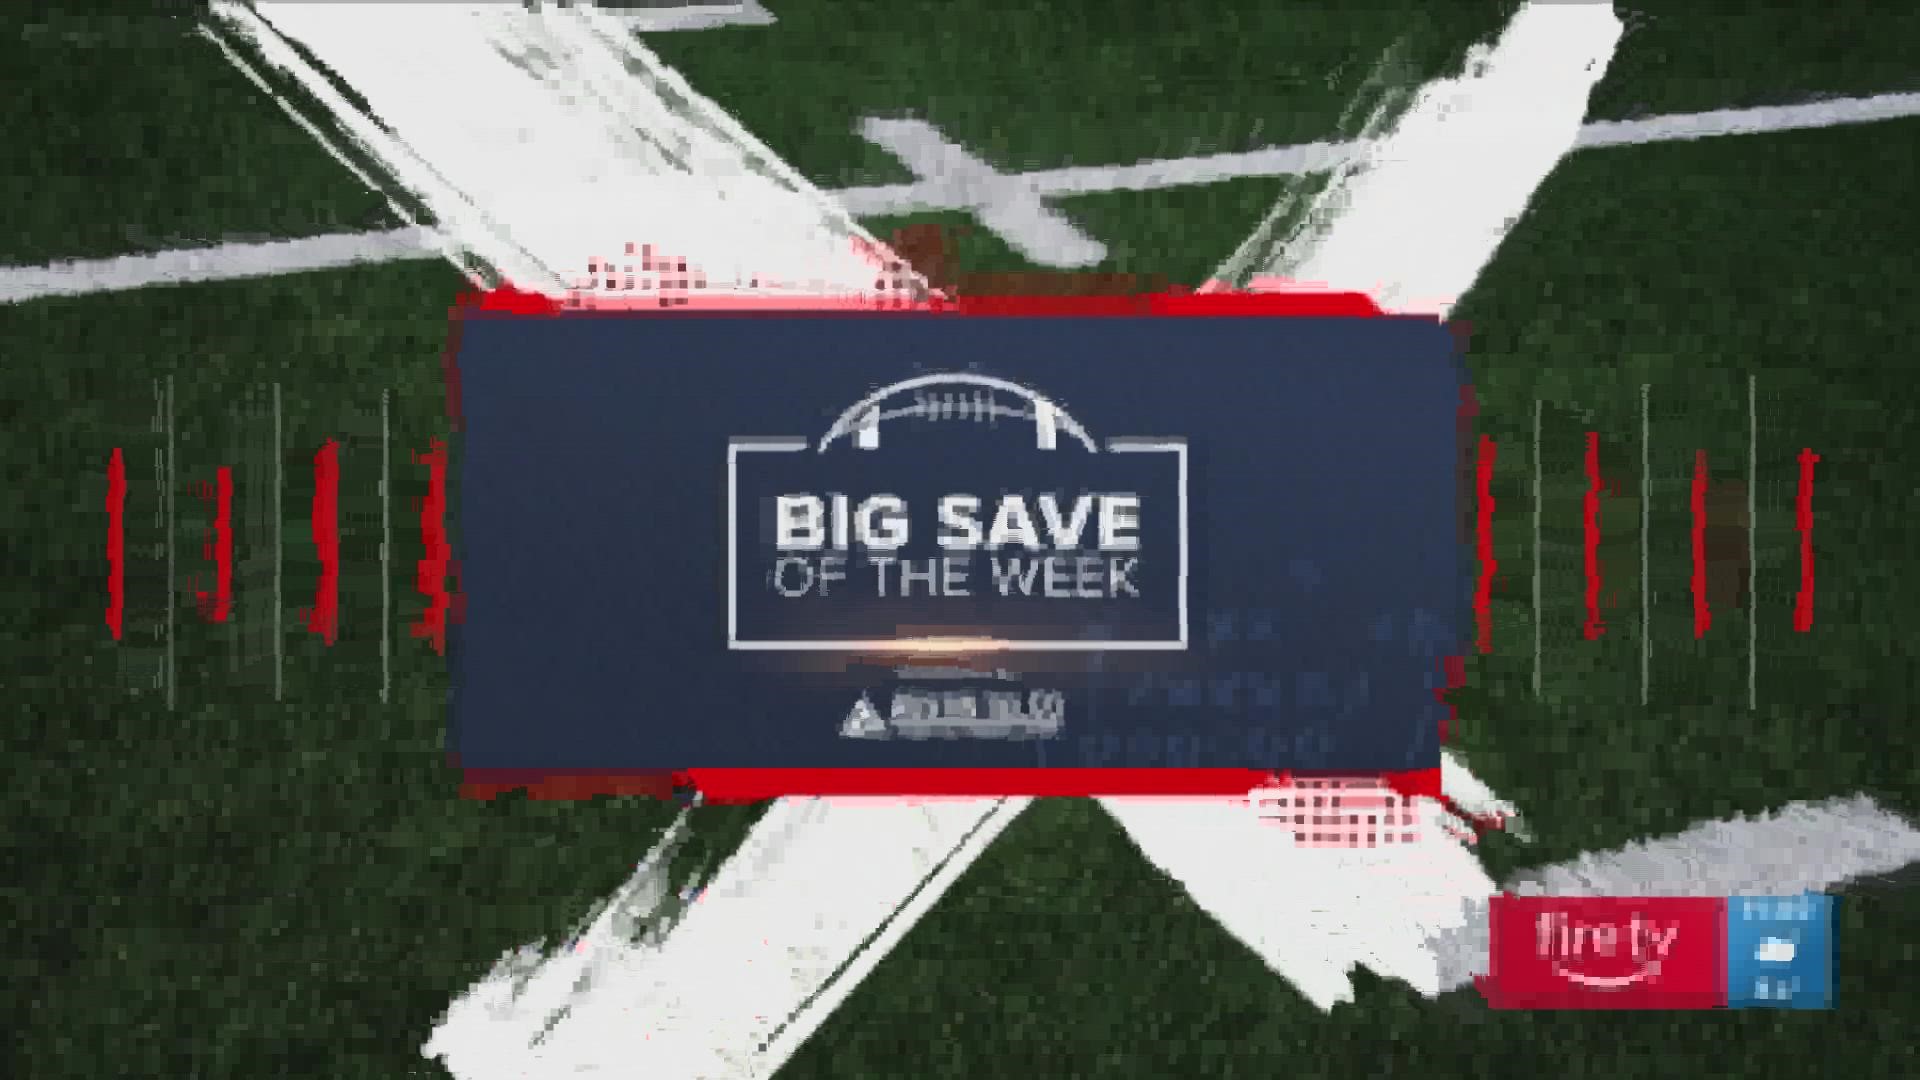 Check out this week's contenders for the Big Save of the Week.